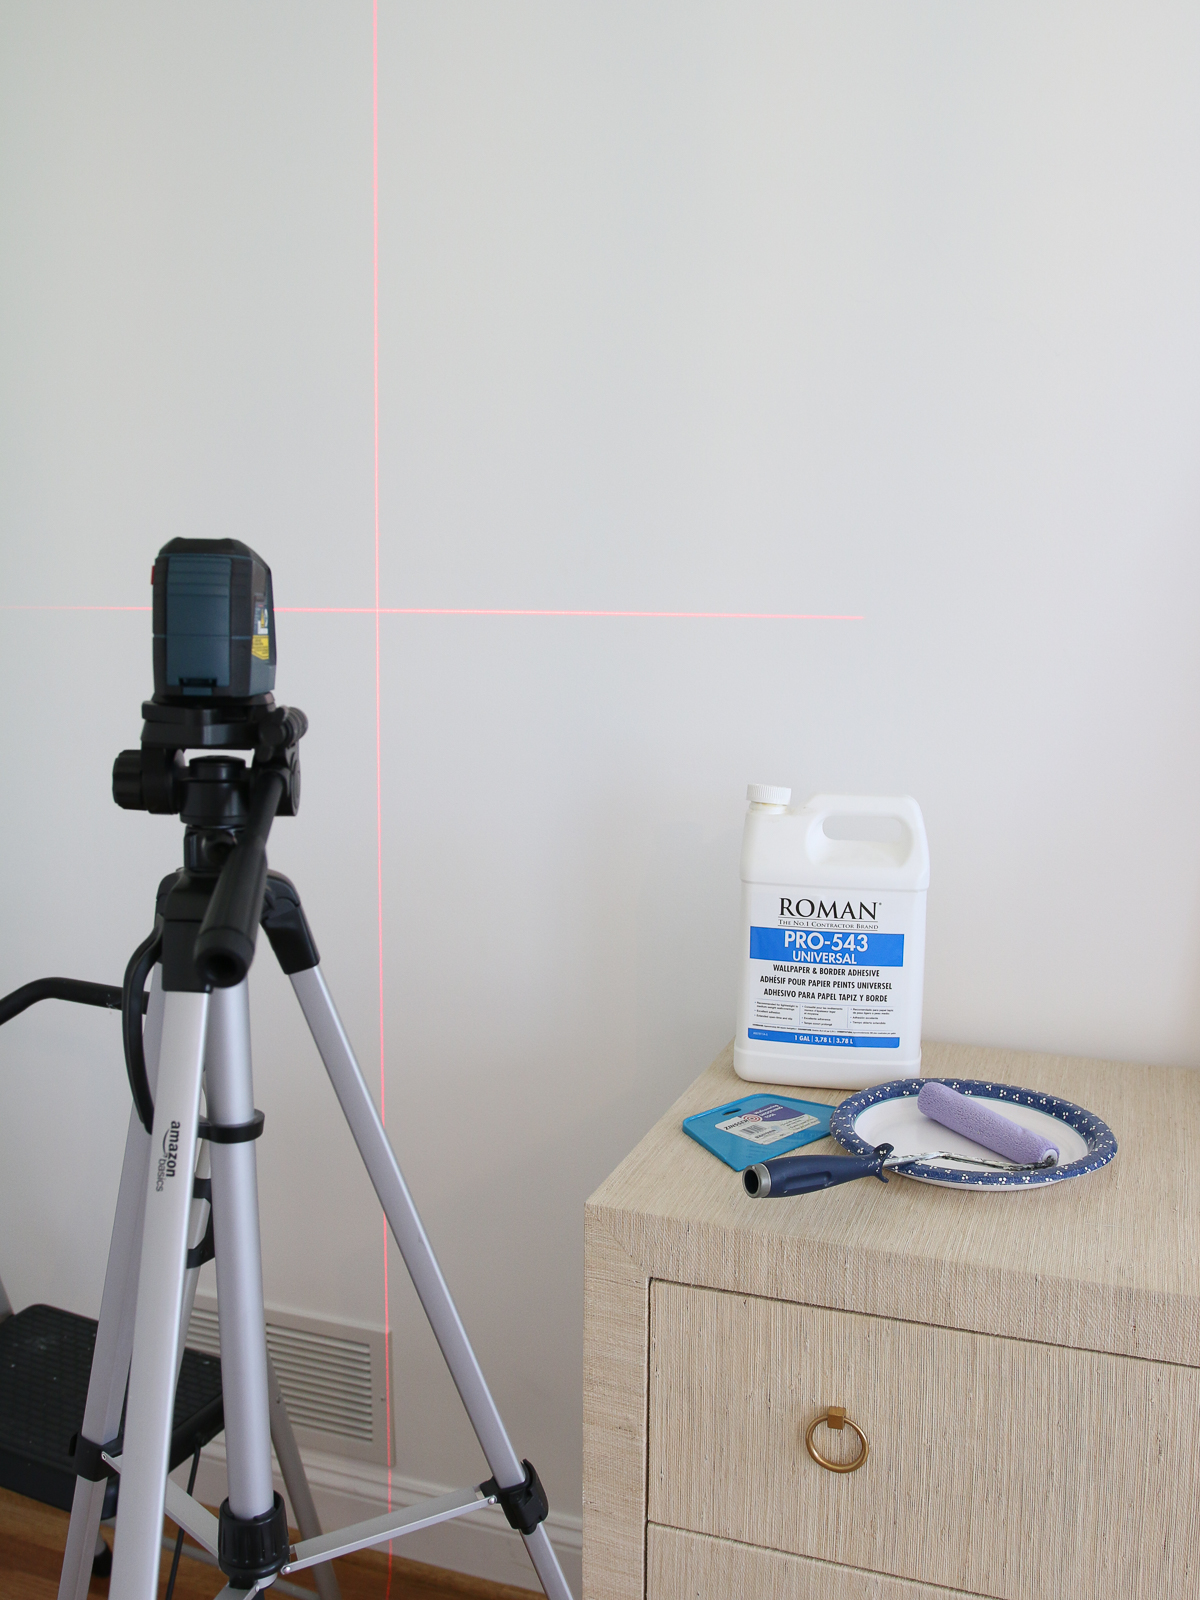 supplies for hanging wallpaper - laser level on a tripod, wallpaper paste, smoothing tool, paint roller